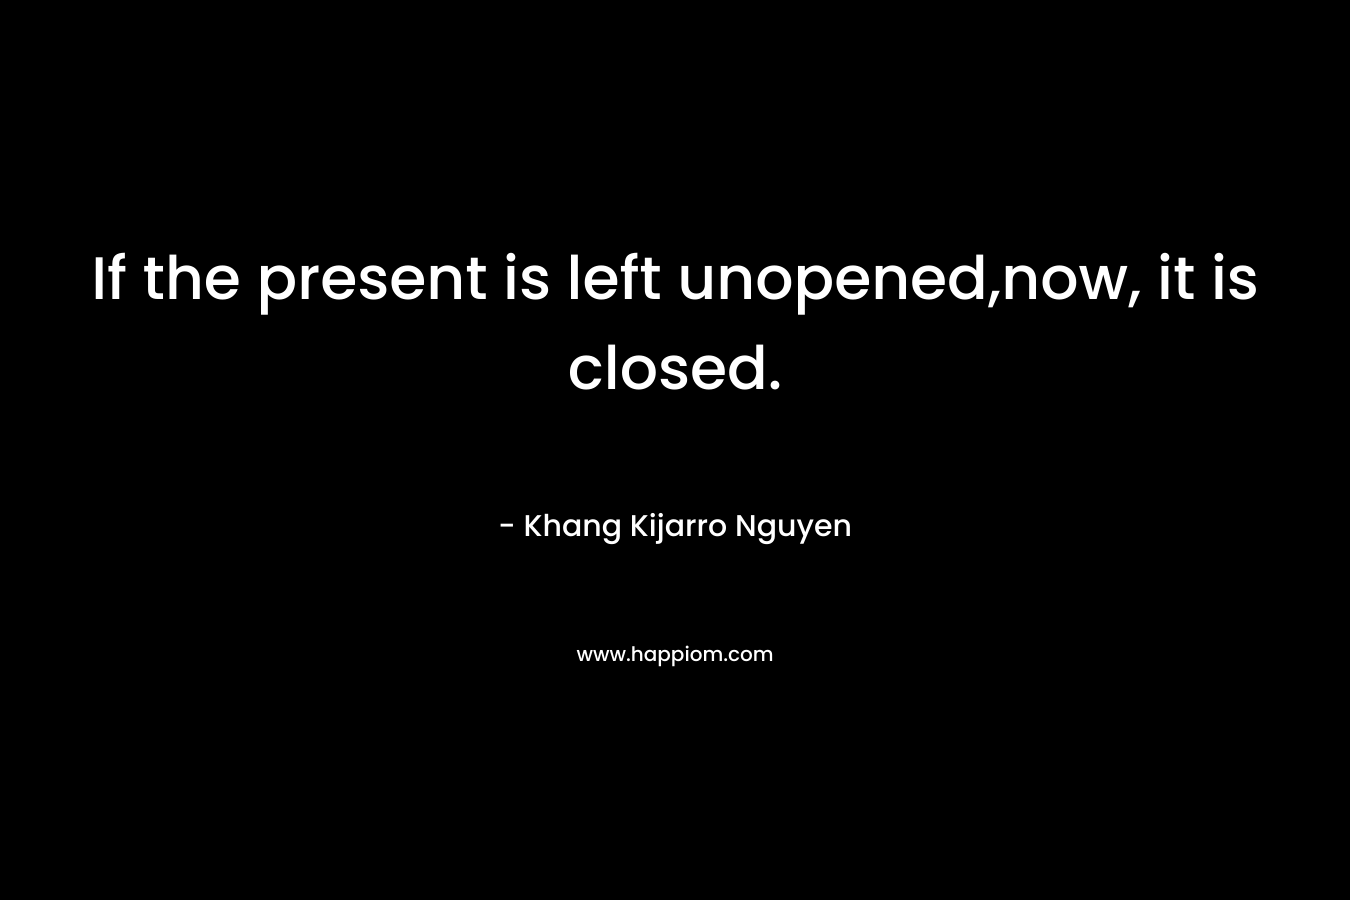 If the present is left unopened,now, it is closed.